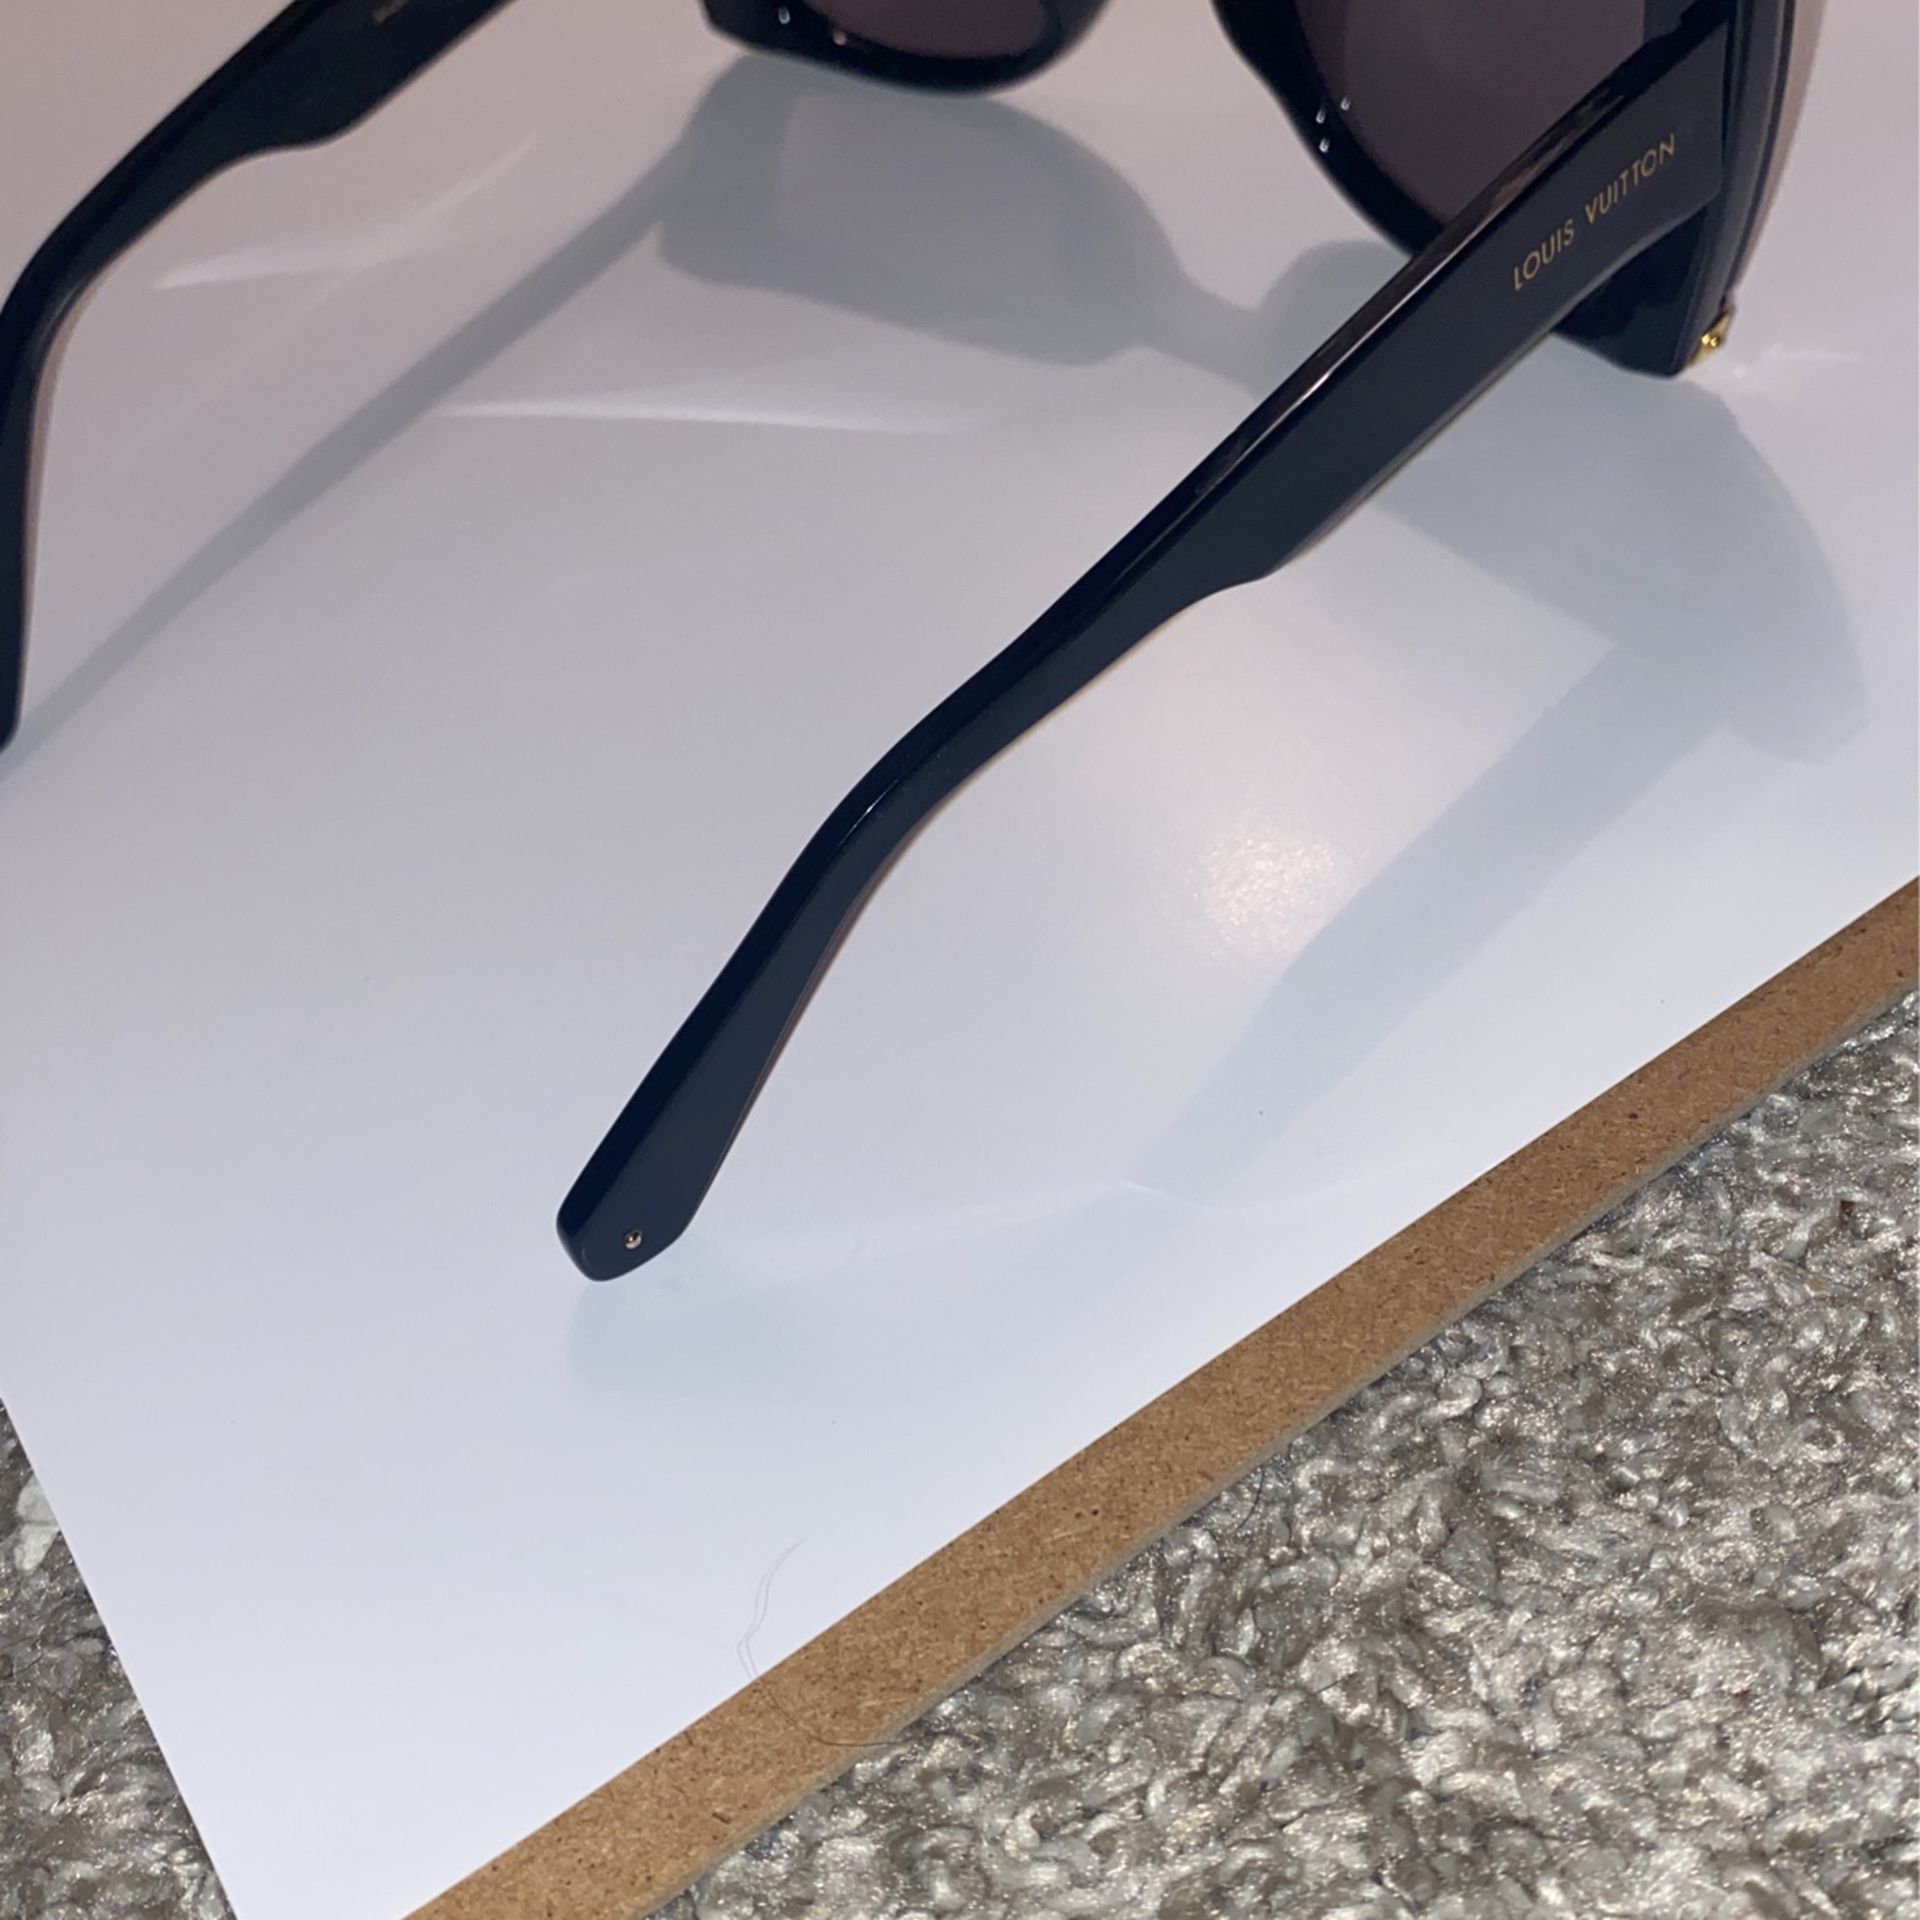 Louis Vuitton Golden Mask Sunglasses for Sale in Los Angeles, CA - OfferUp